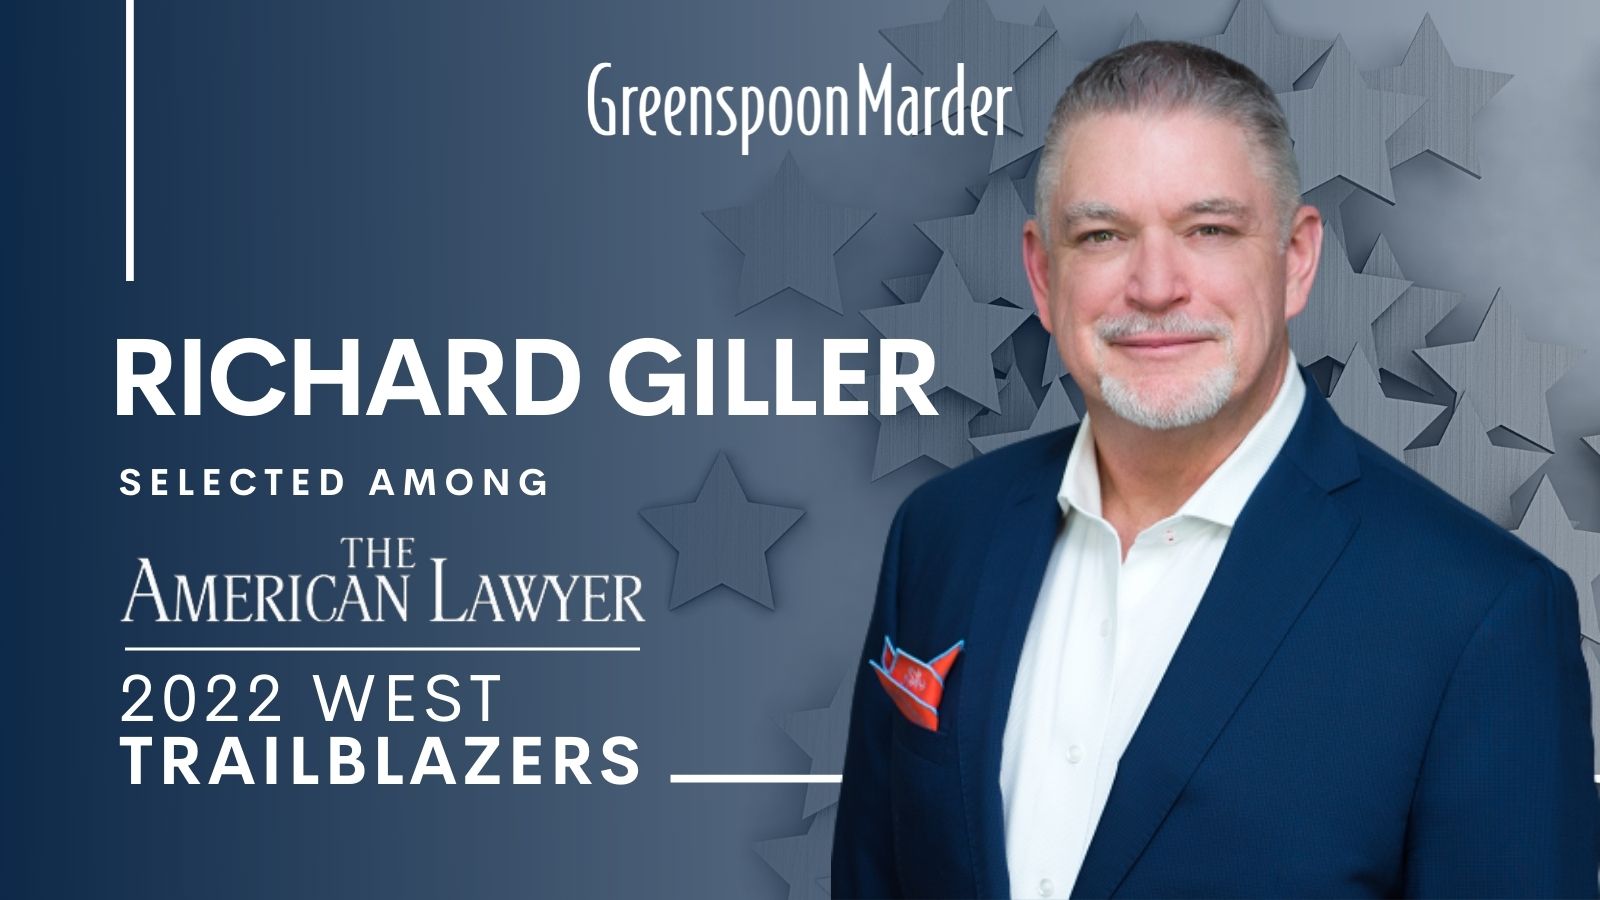 Greenspoon Marder Partner Richard Giller Named to The American Lawyer’s